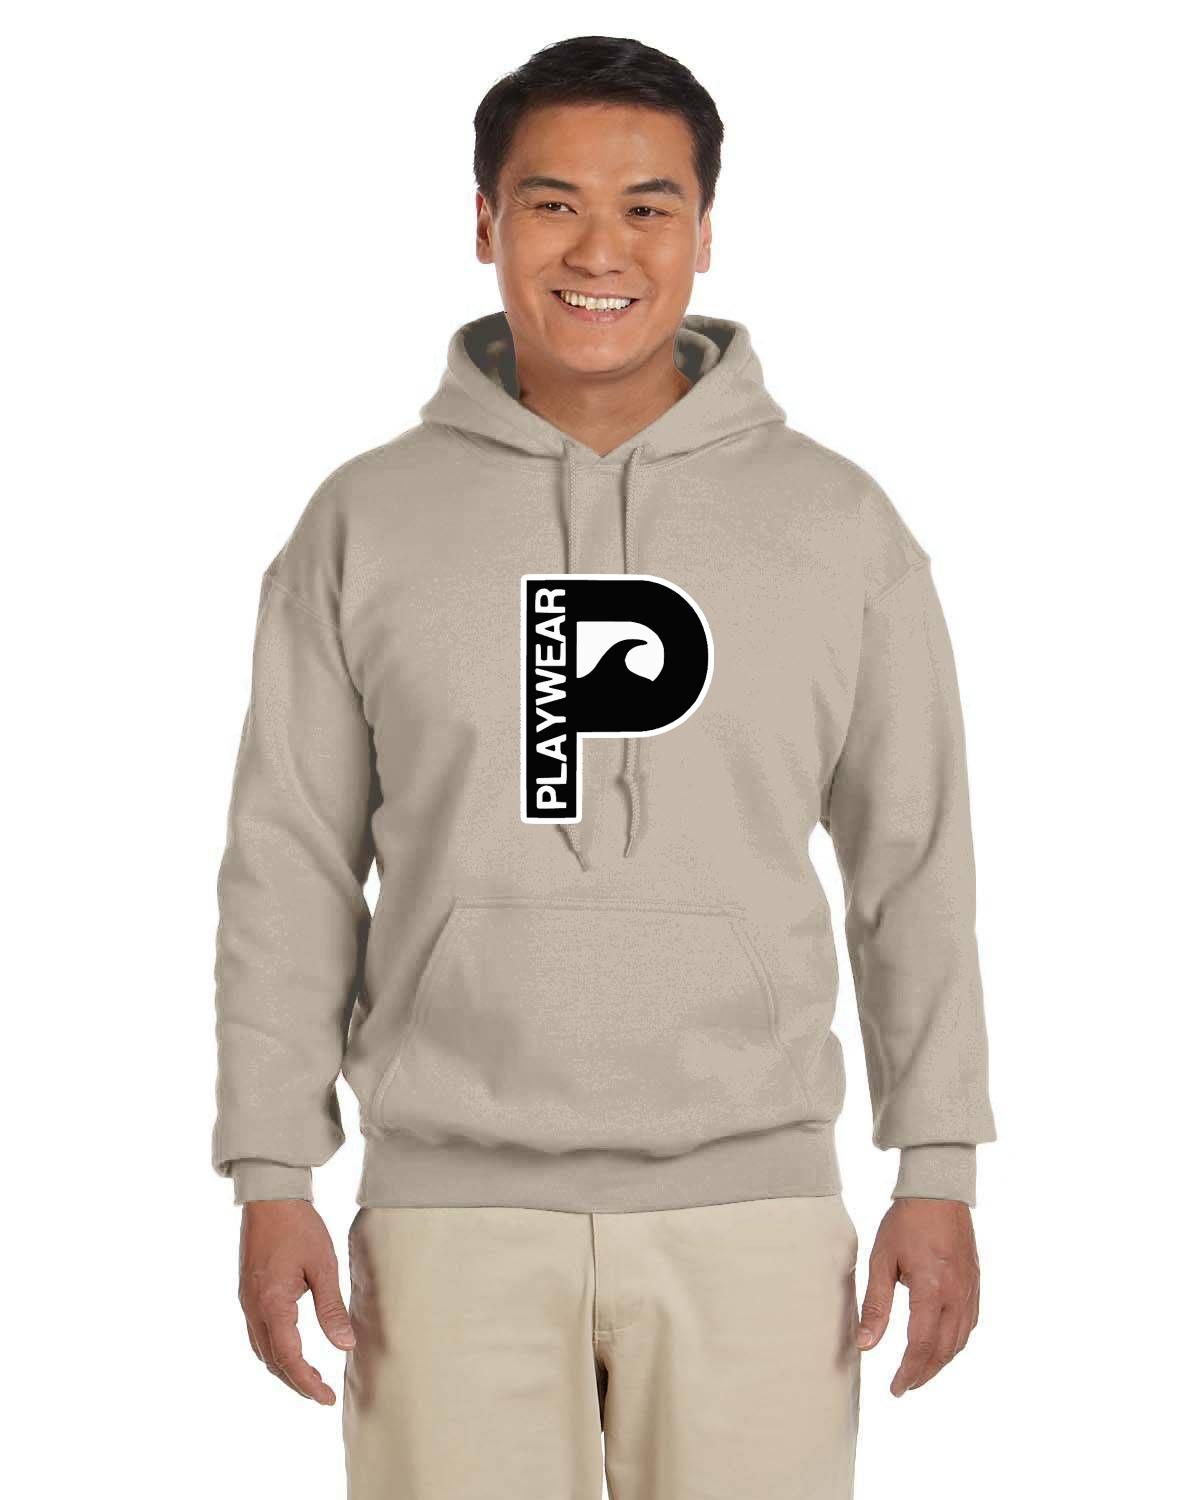 PULLOVER *FREE SHIPPING*